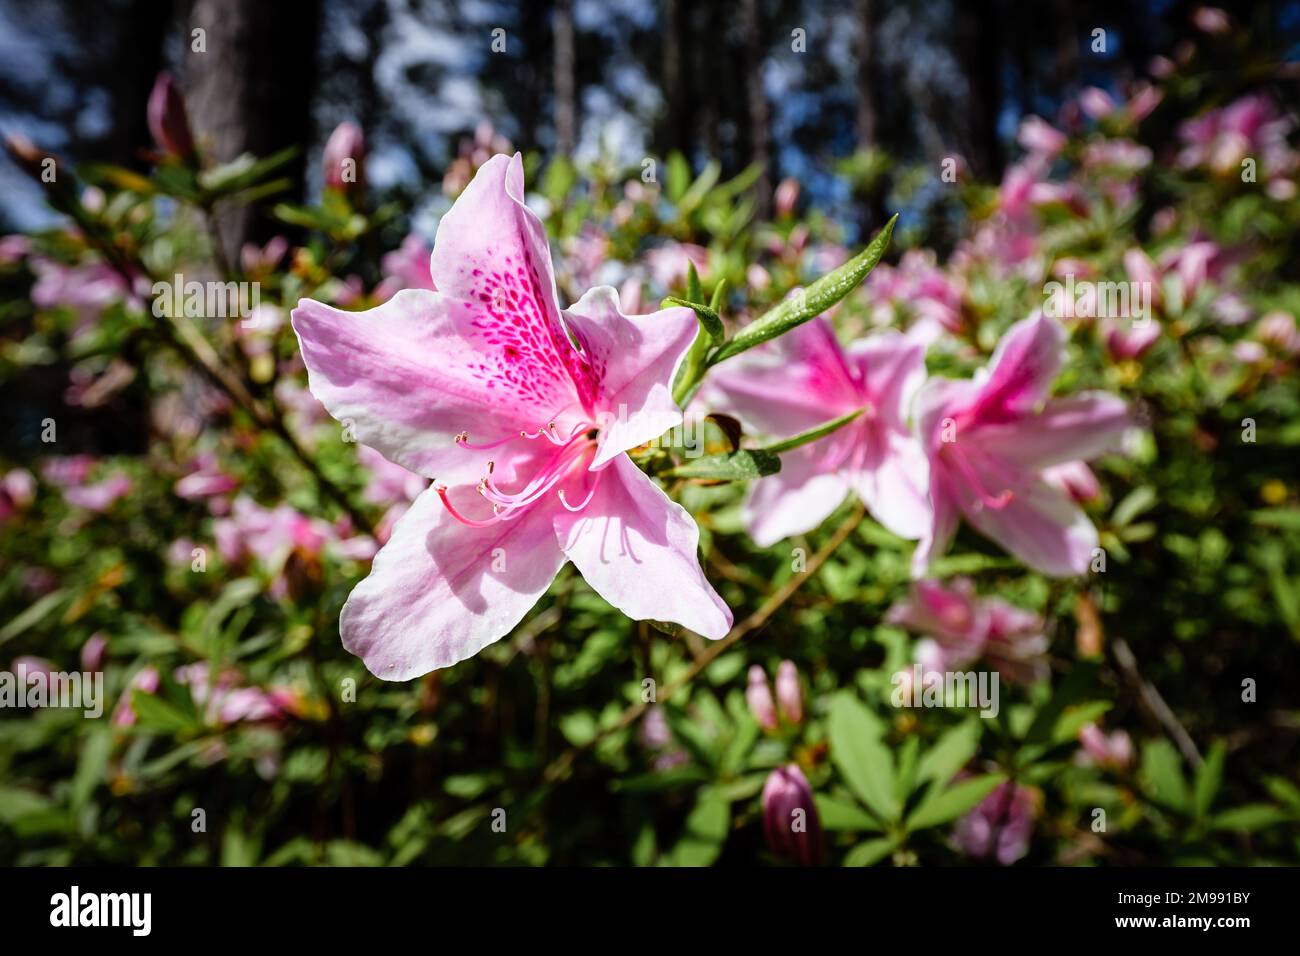 Colorful bright pink and white azalea flowers with natural green bush background. Stock Photo